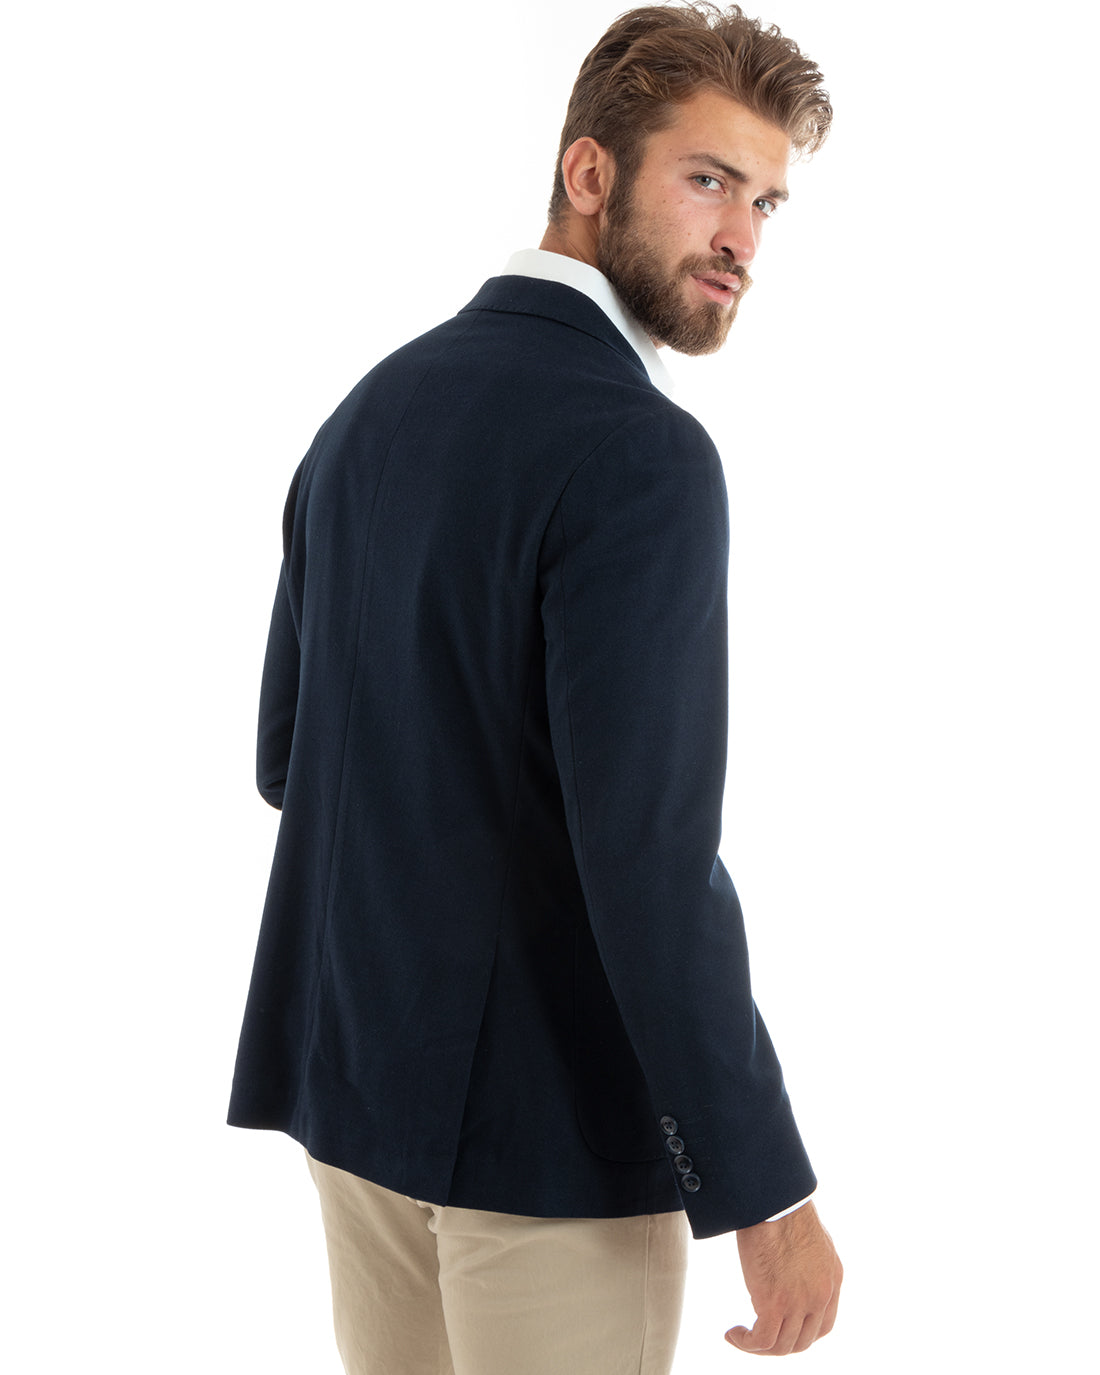 Men's Jacket Basic Blazer Single-breasted Classic Lapel Stitched Solid Color Casual Blue GIOSAL-G3085A